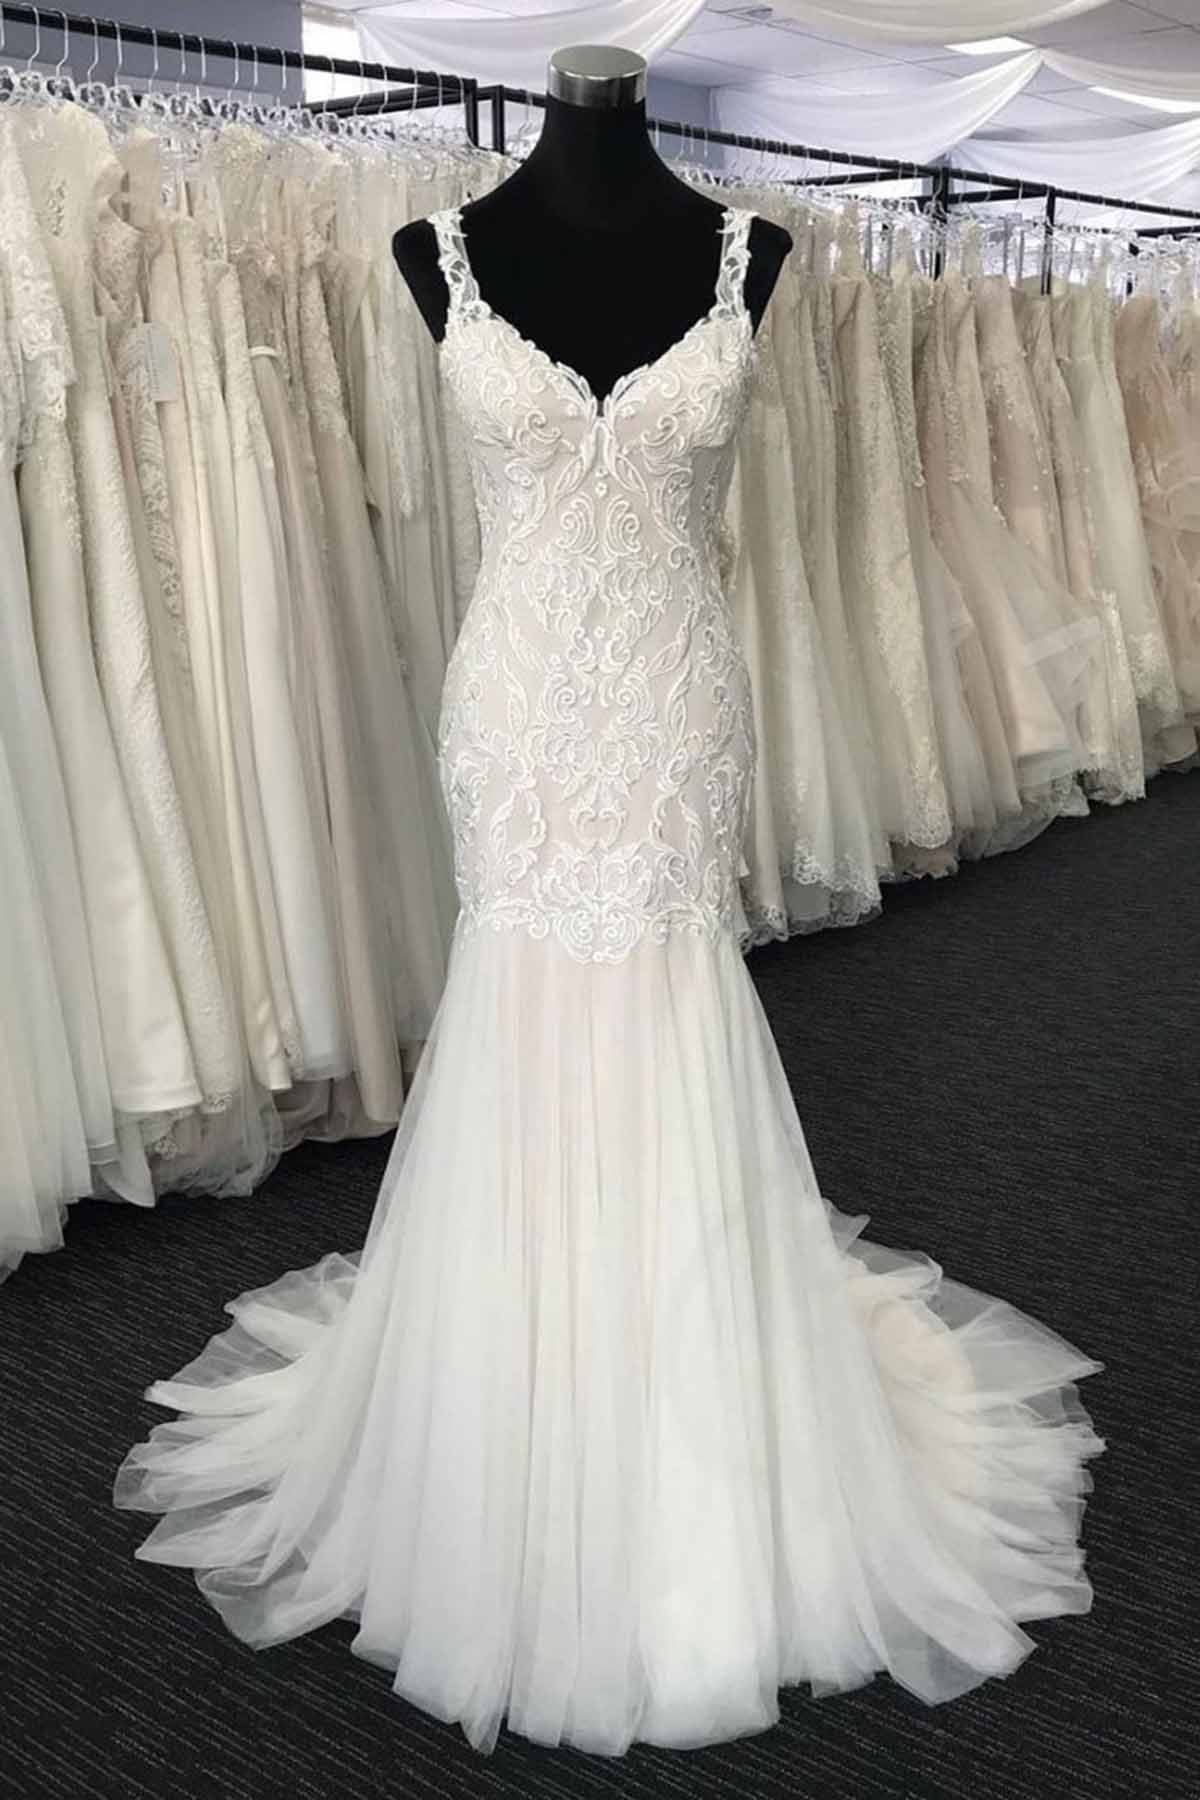 Glamorous White Tulle V-Neck Long Appliques Wedding Dress Mermaid Lace Bridal Gowns On Sale-27dress